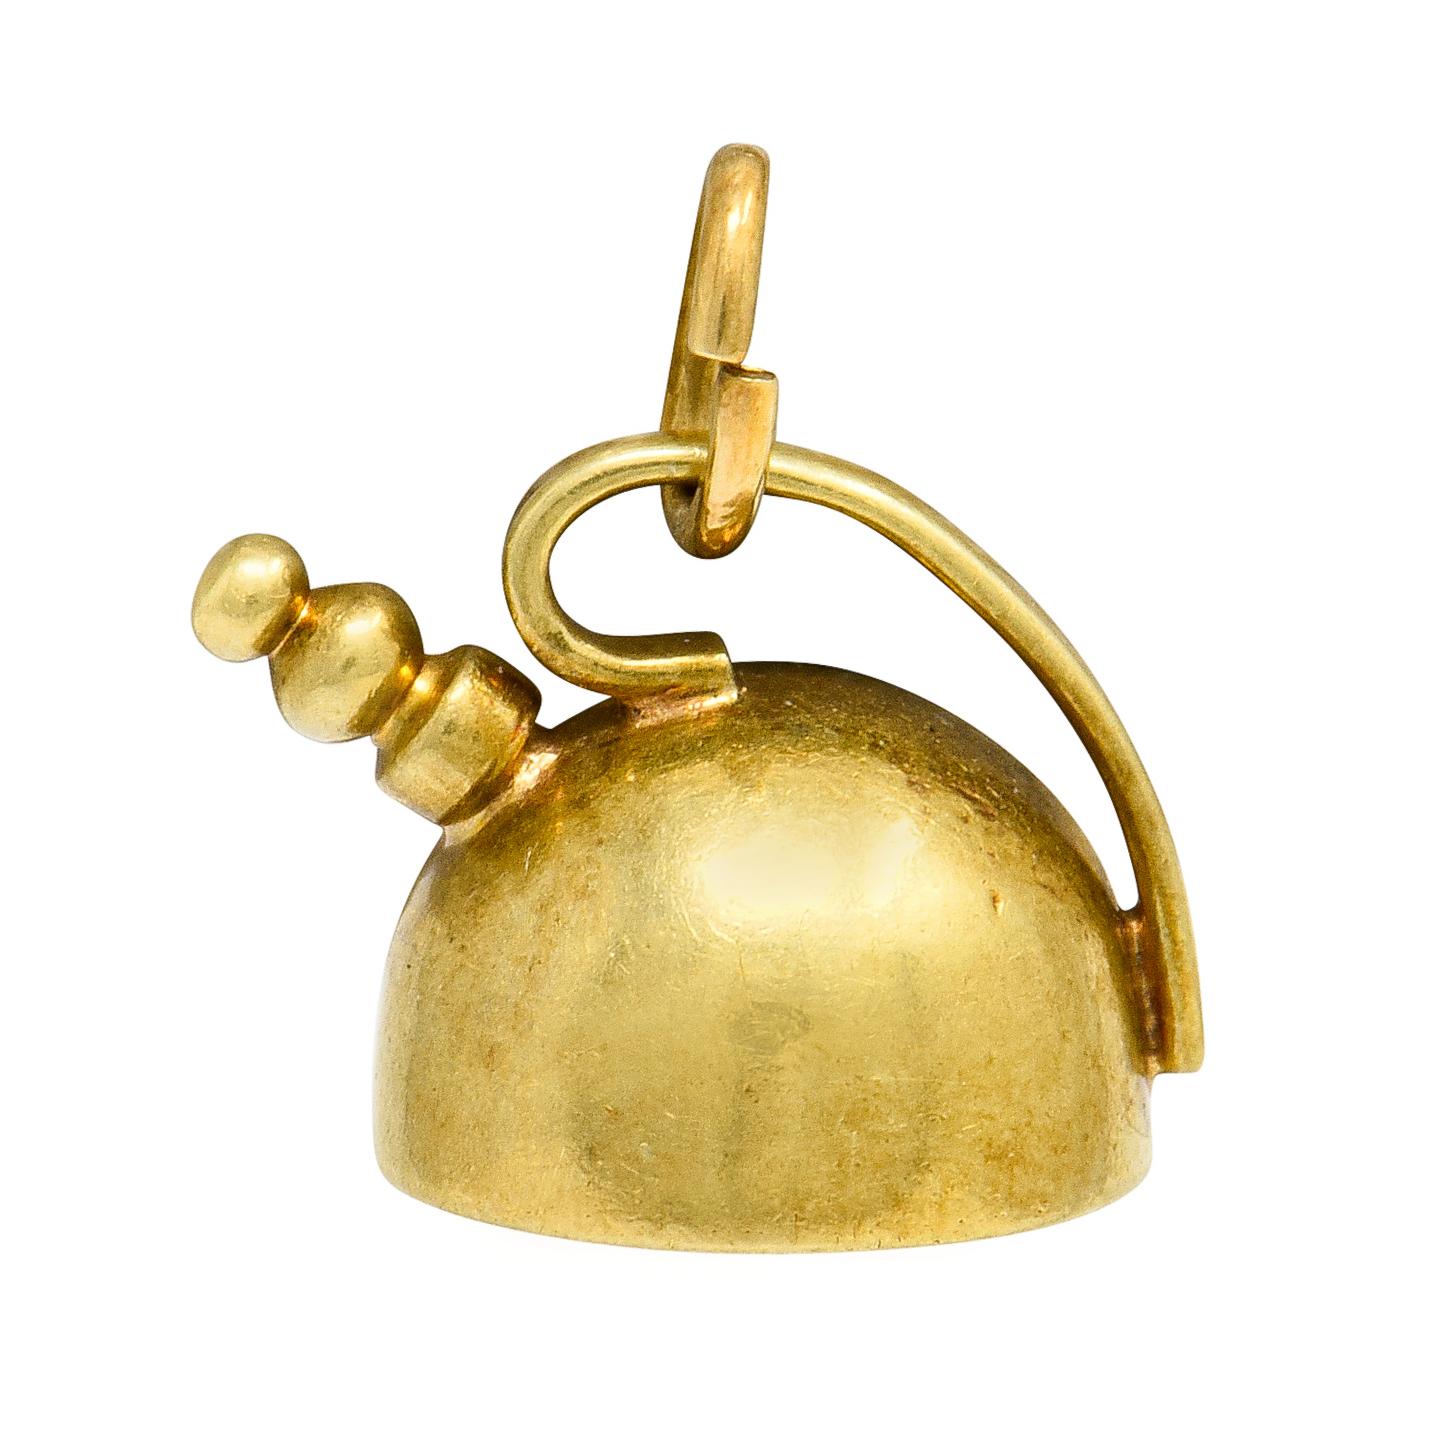 Charm designed as a stylized tea kettle

With gold beading as spout and a sleek curved handle

Completed by jump ring bale

Numbered and fully signed Cartier

Stamped 14 for 14 karat gold with maker's mark for Sloan & Co. for Cartier

Circa: